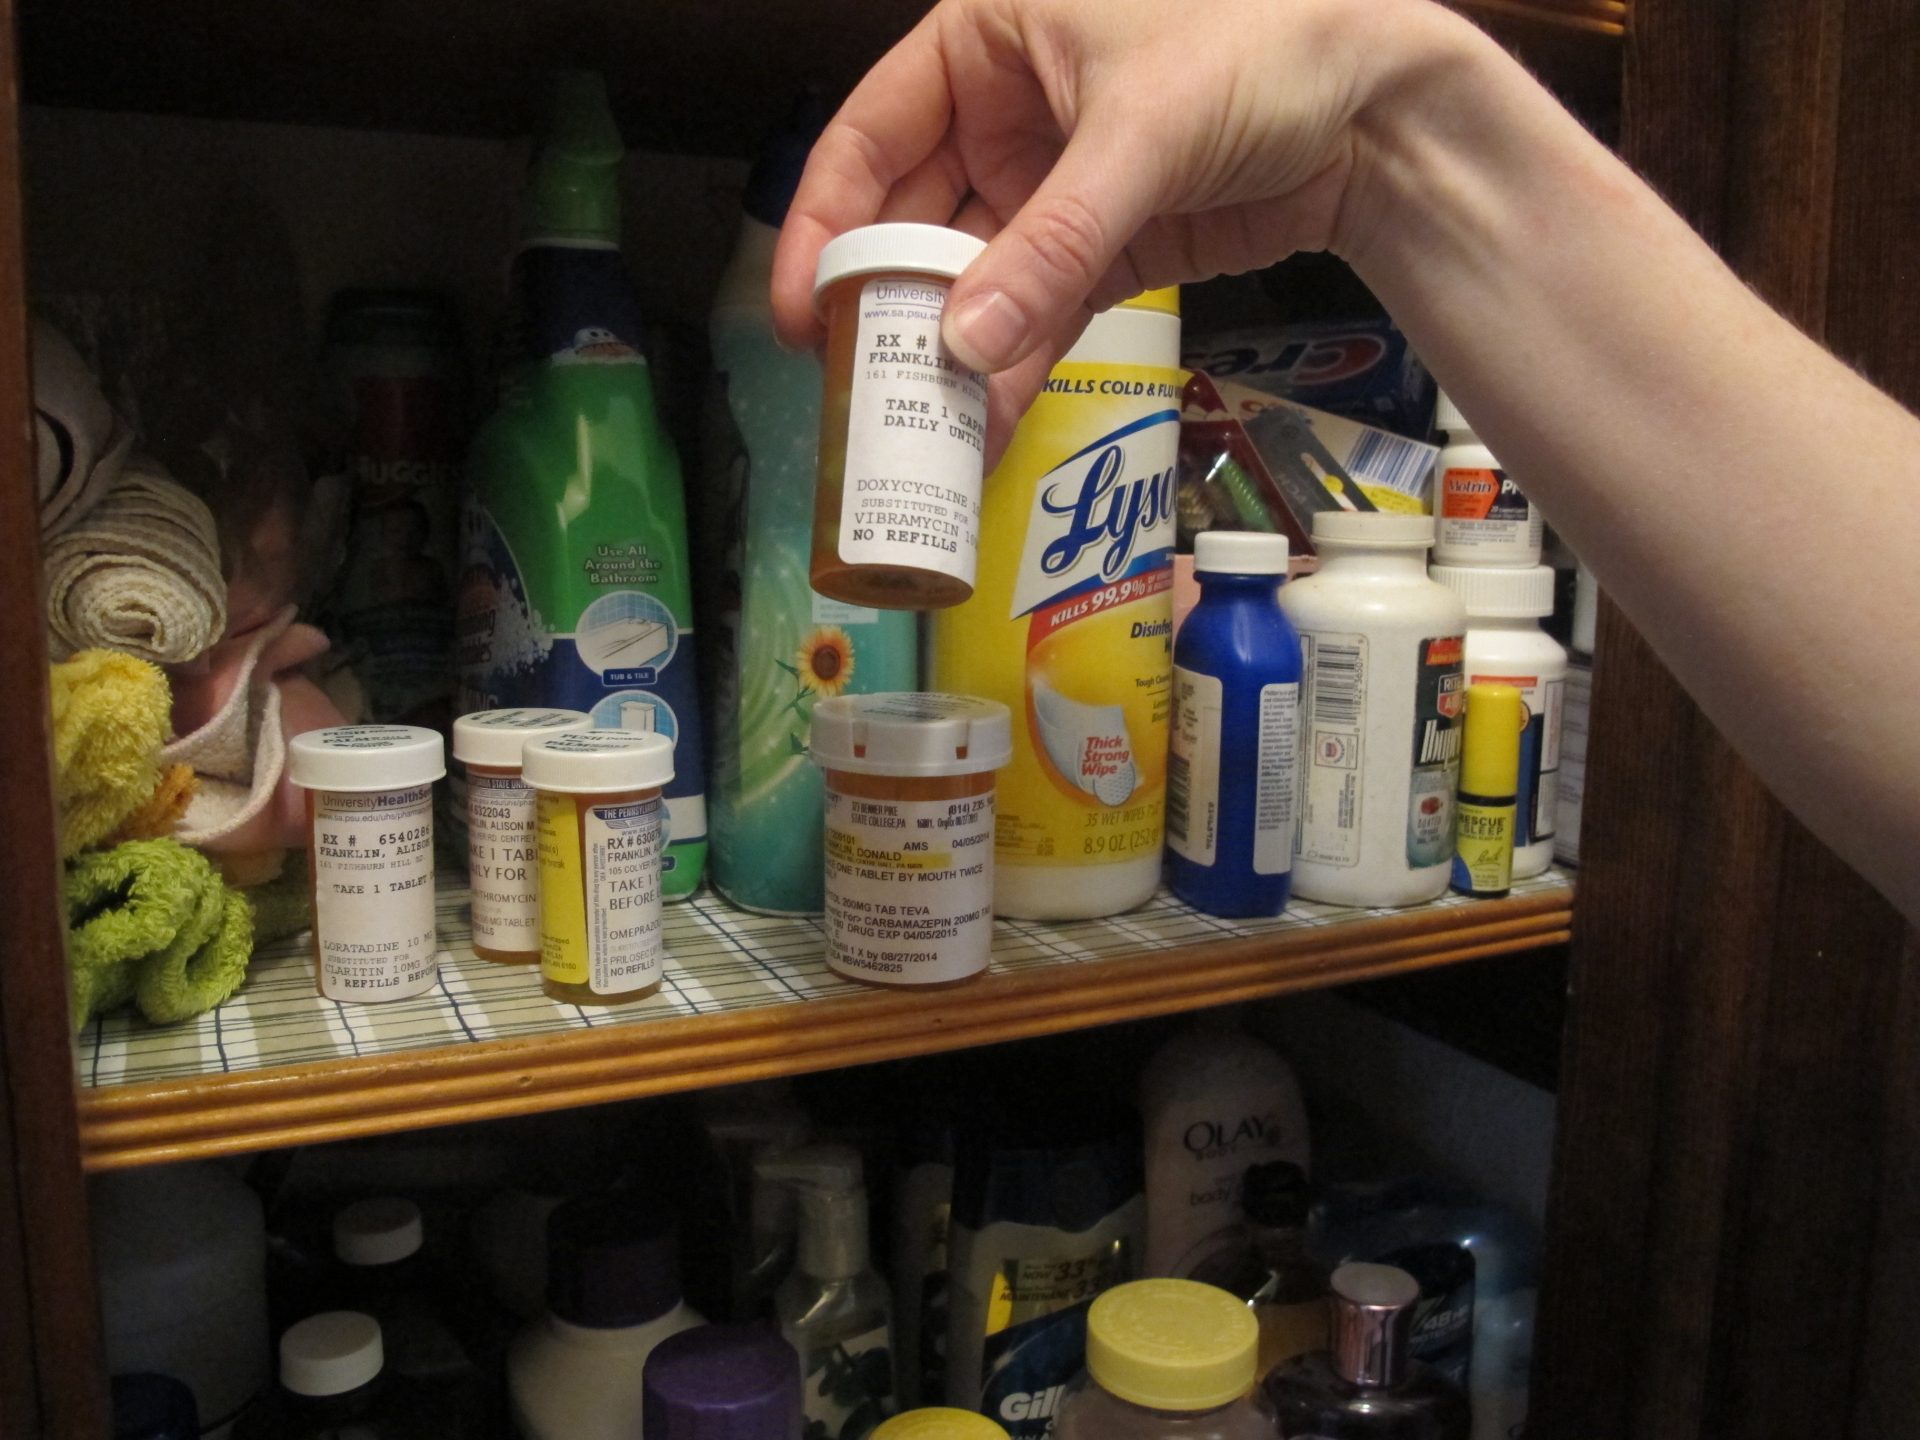 Penn State researcher Alison Franklin holds up one of five prescriptions in her closet at home in Bellefonte, Pa.